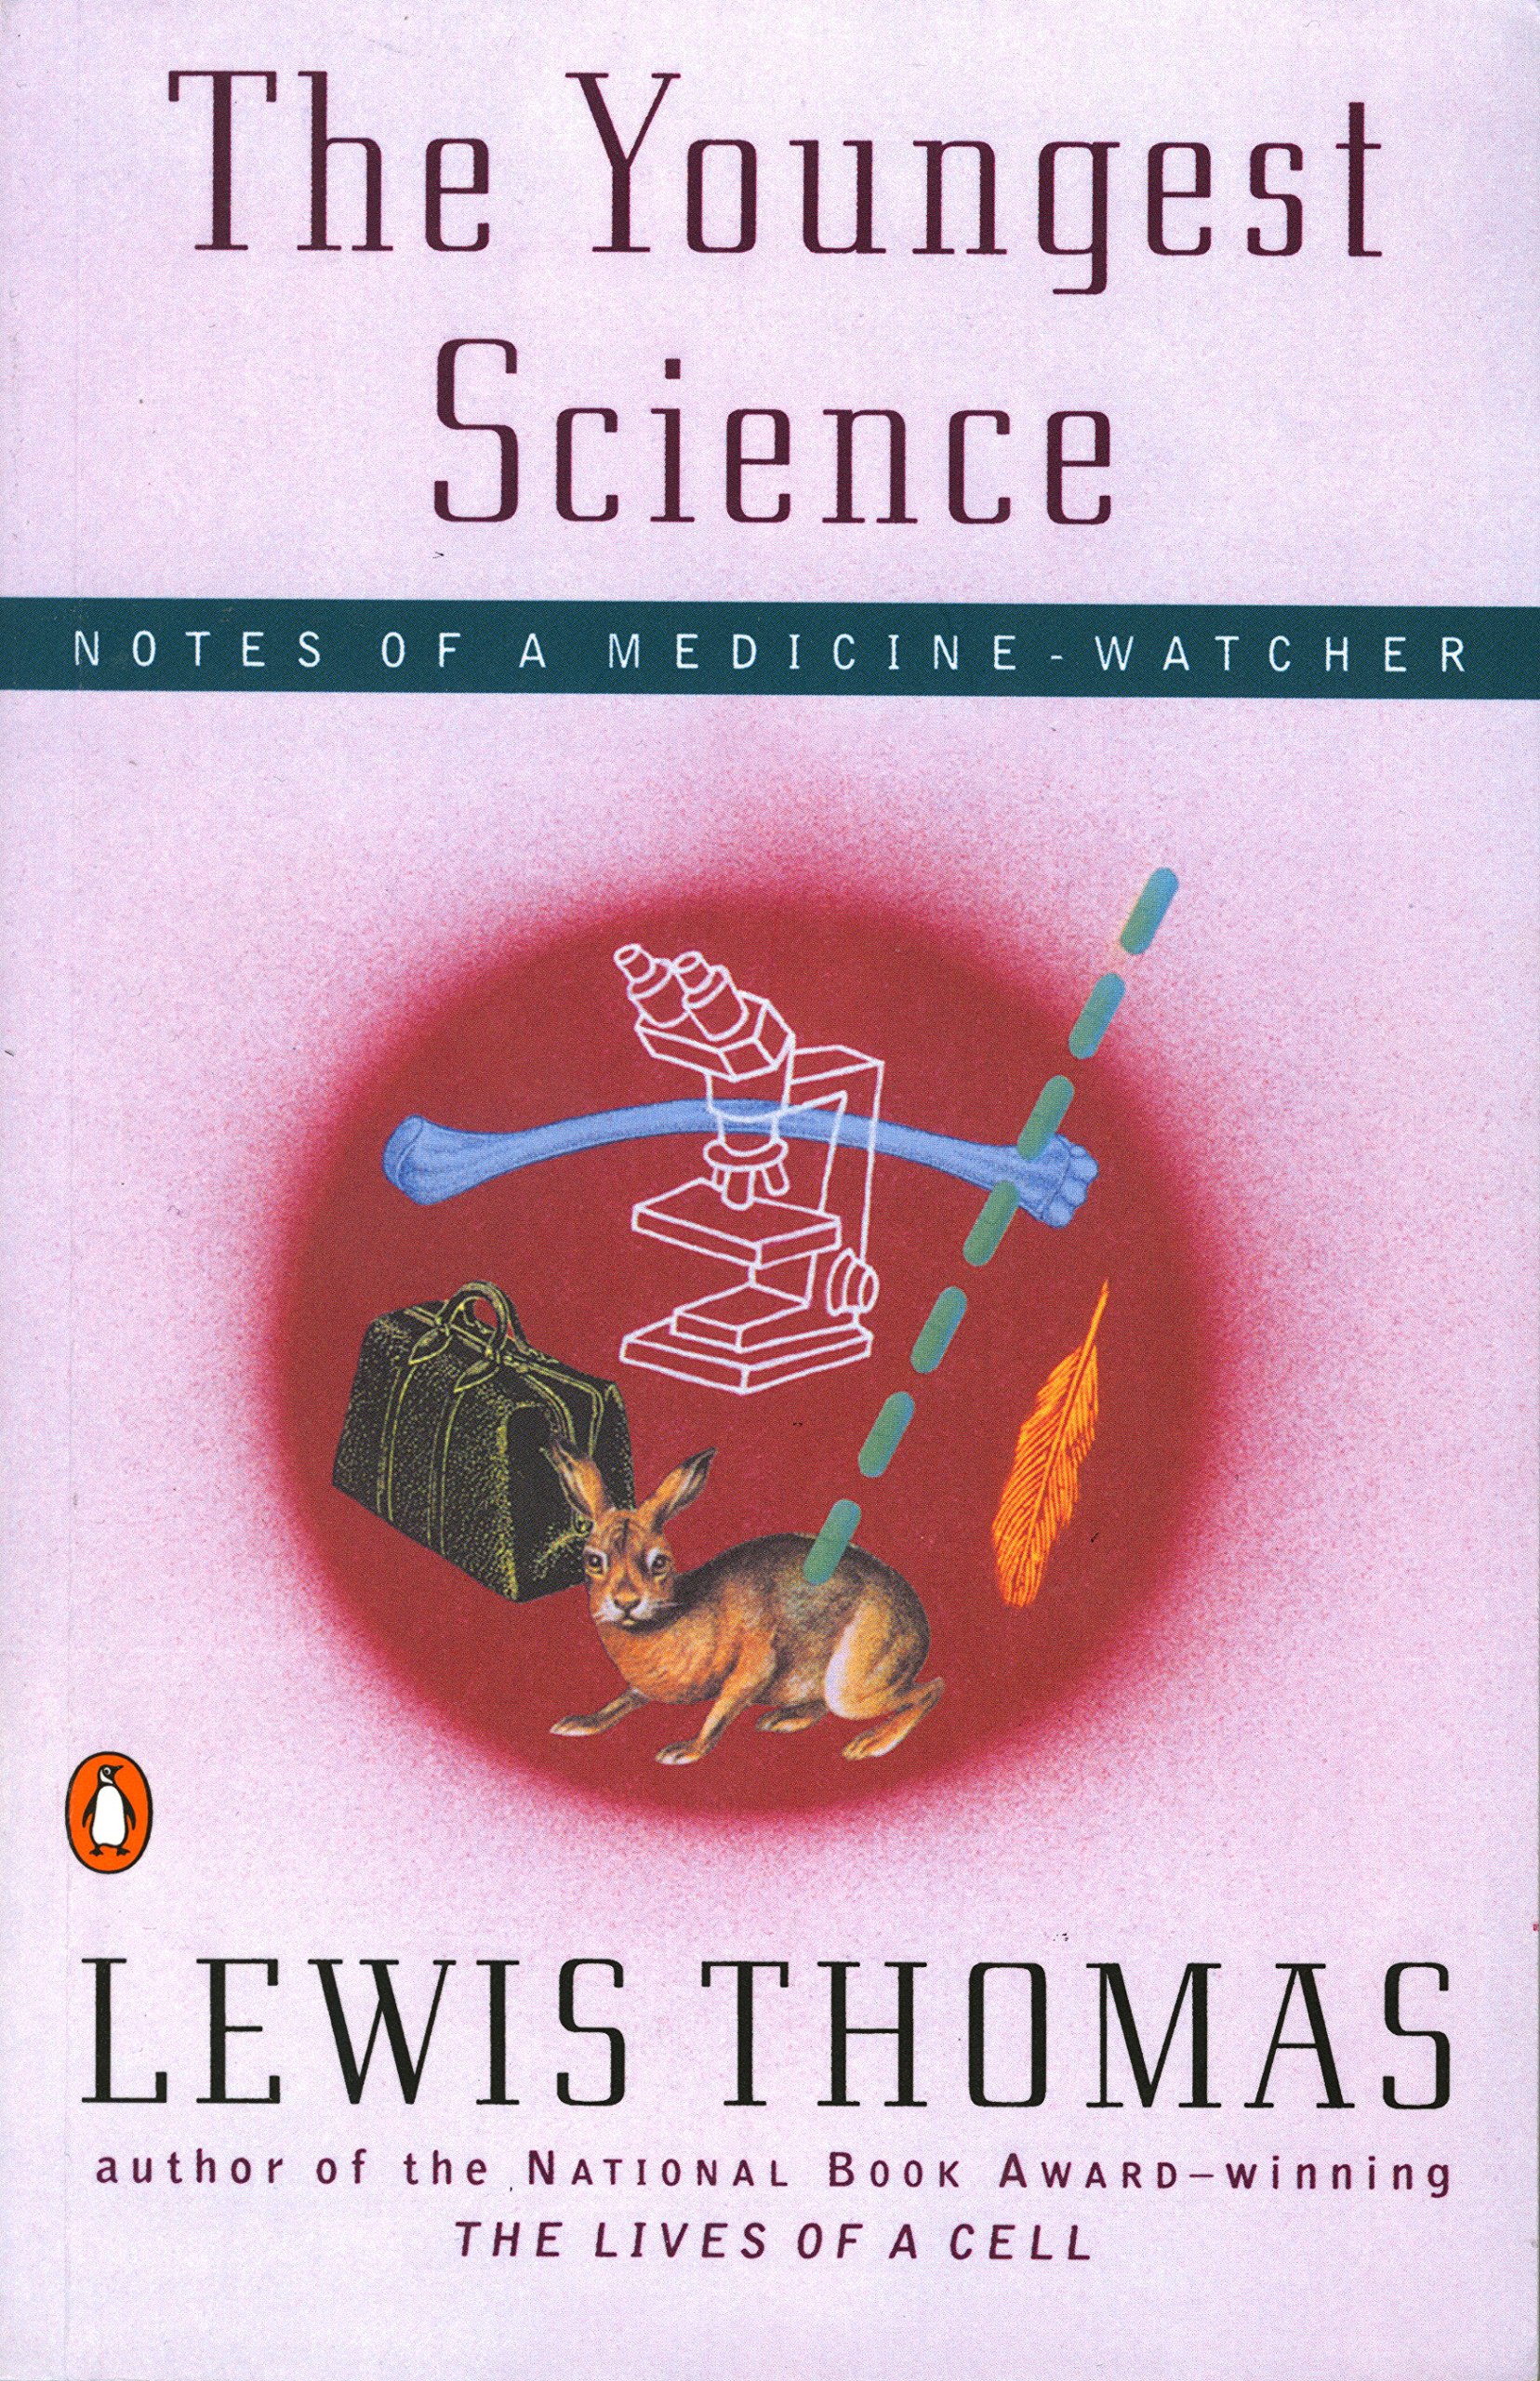 The Youngest Science, Lewis Thomas